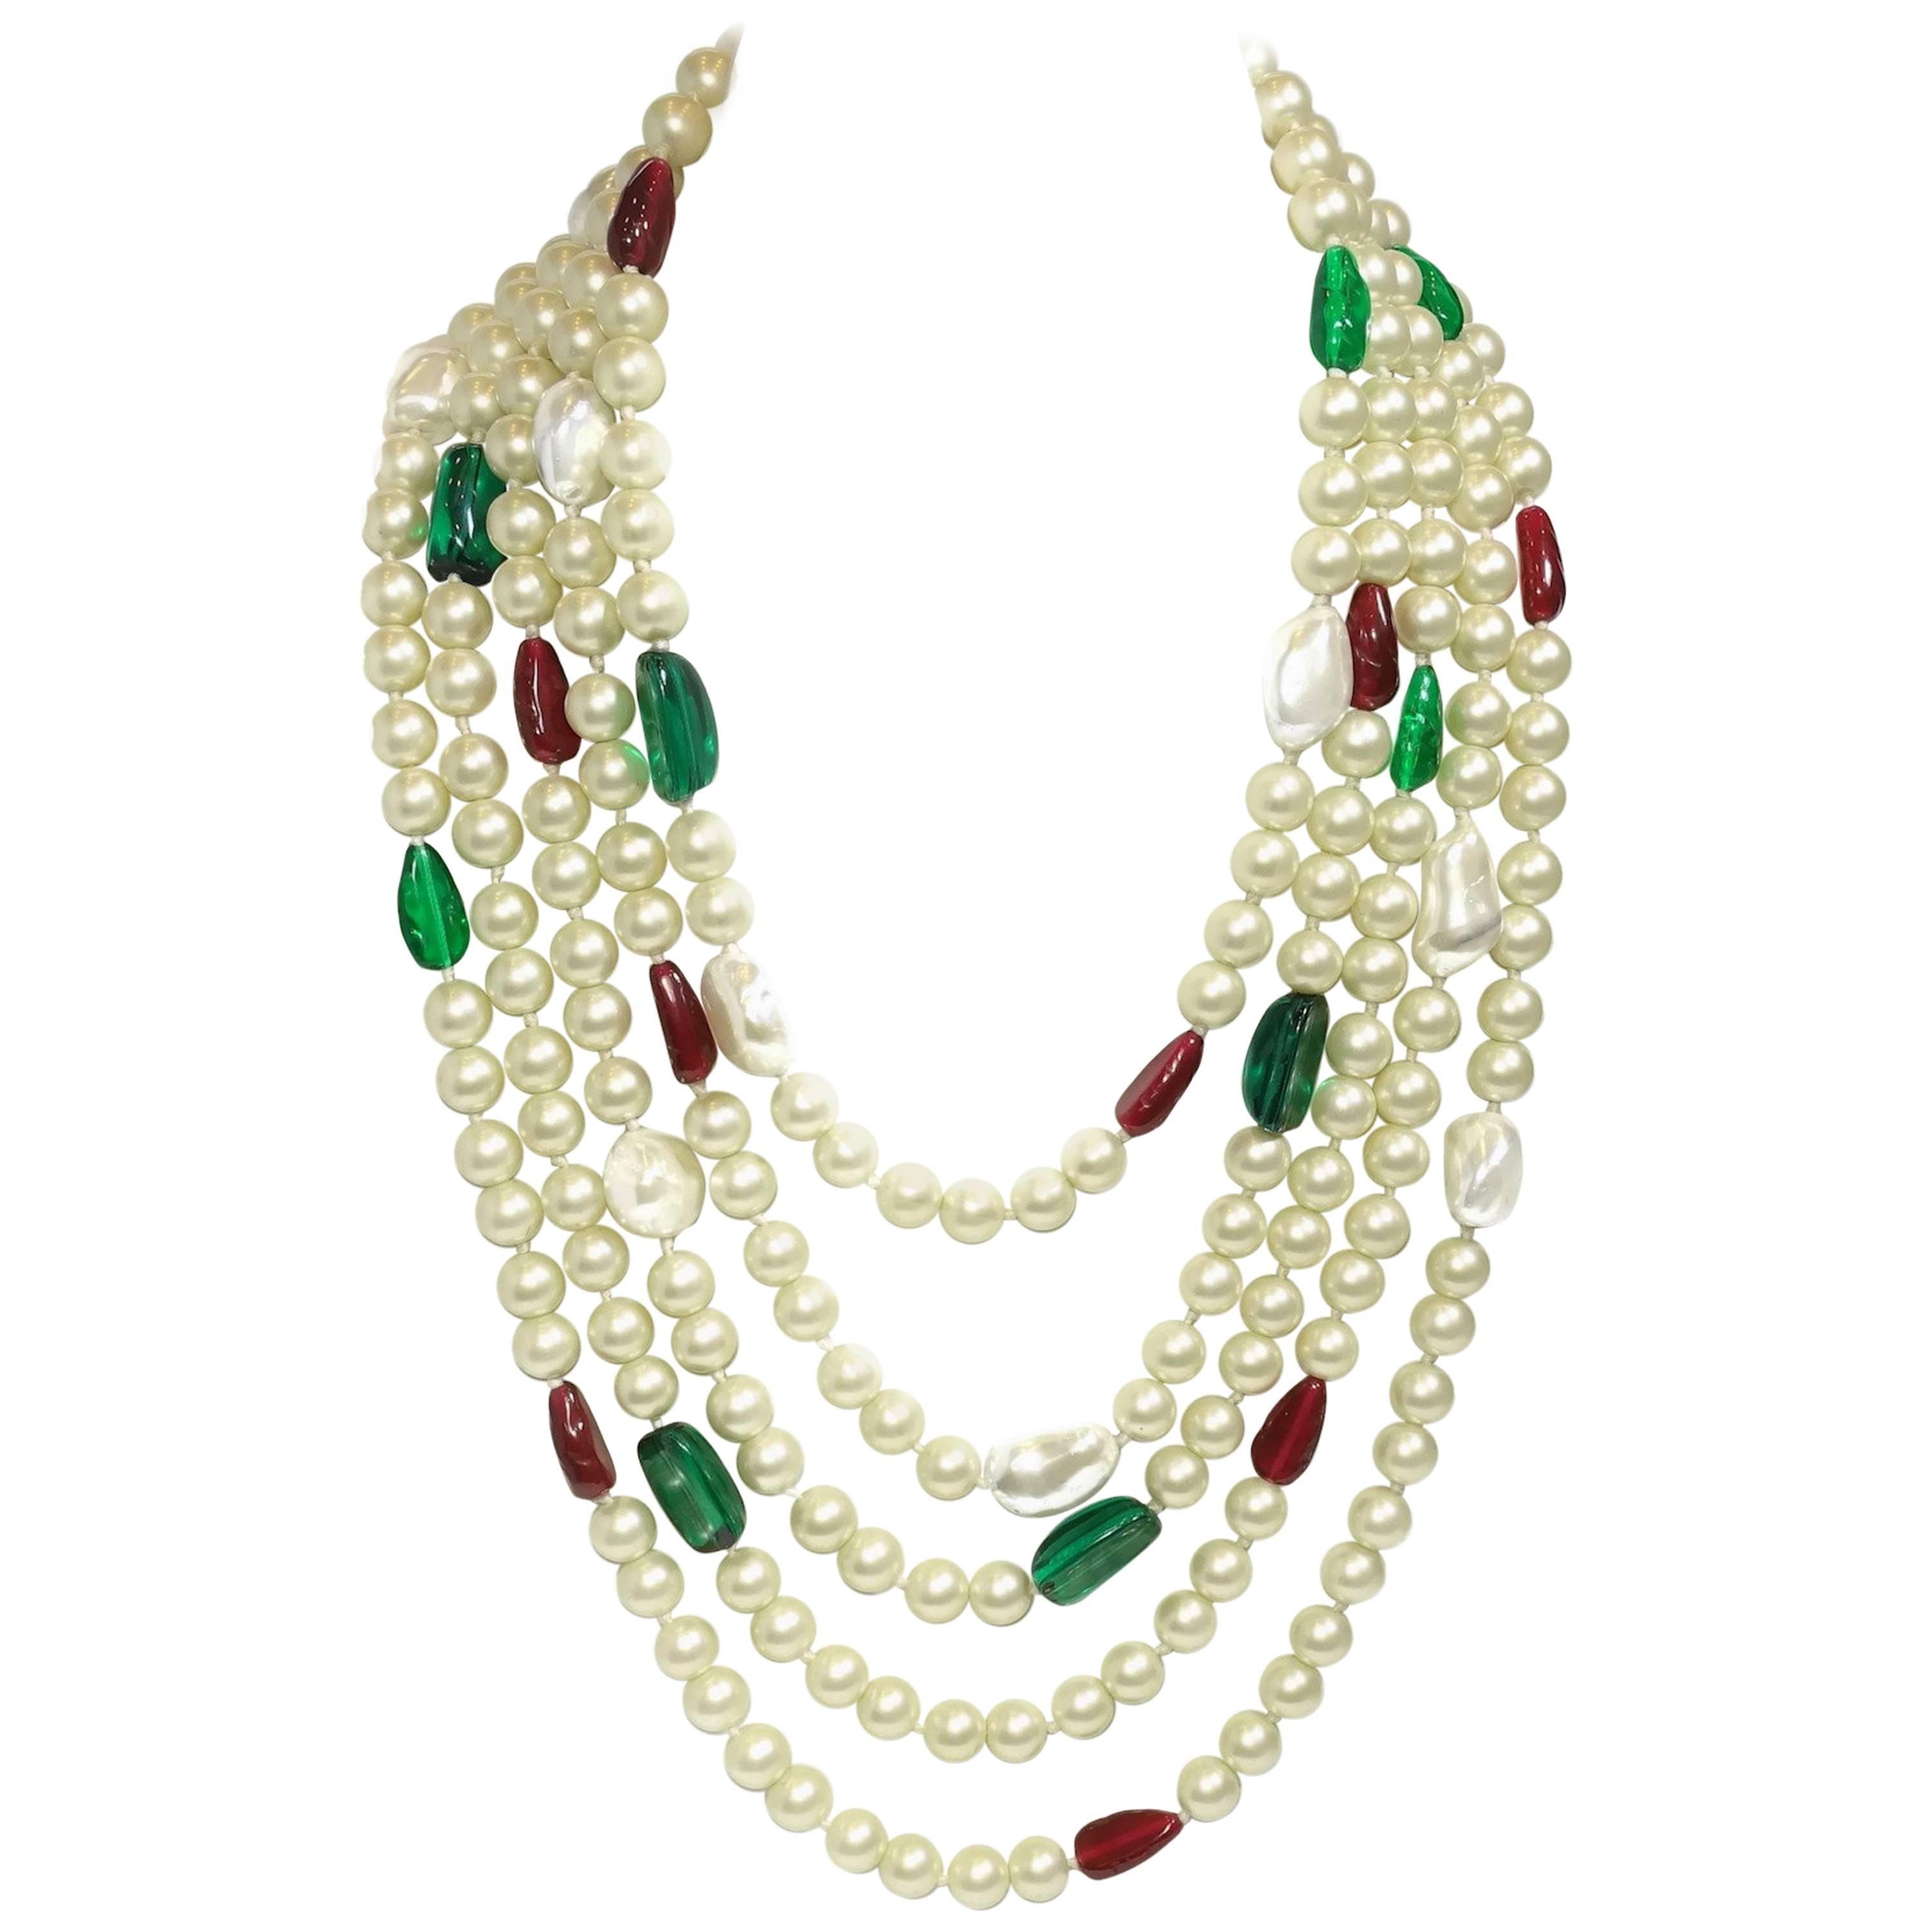 Signed Kenneth Jay Lane Multi-Strand Faux Pearl, Green & Red Stone Necklace